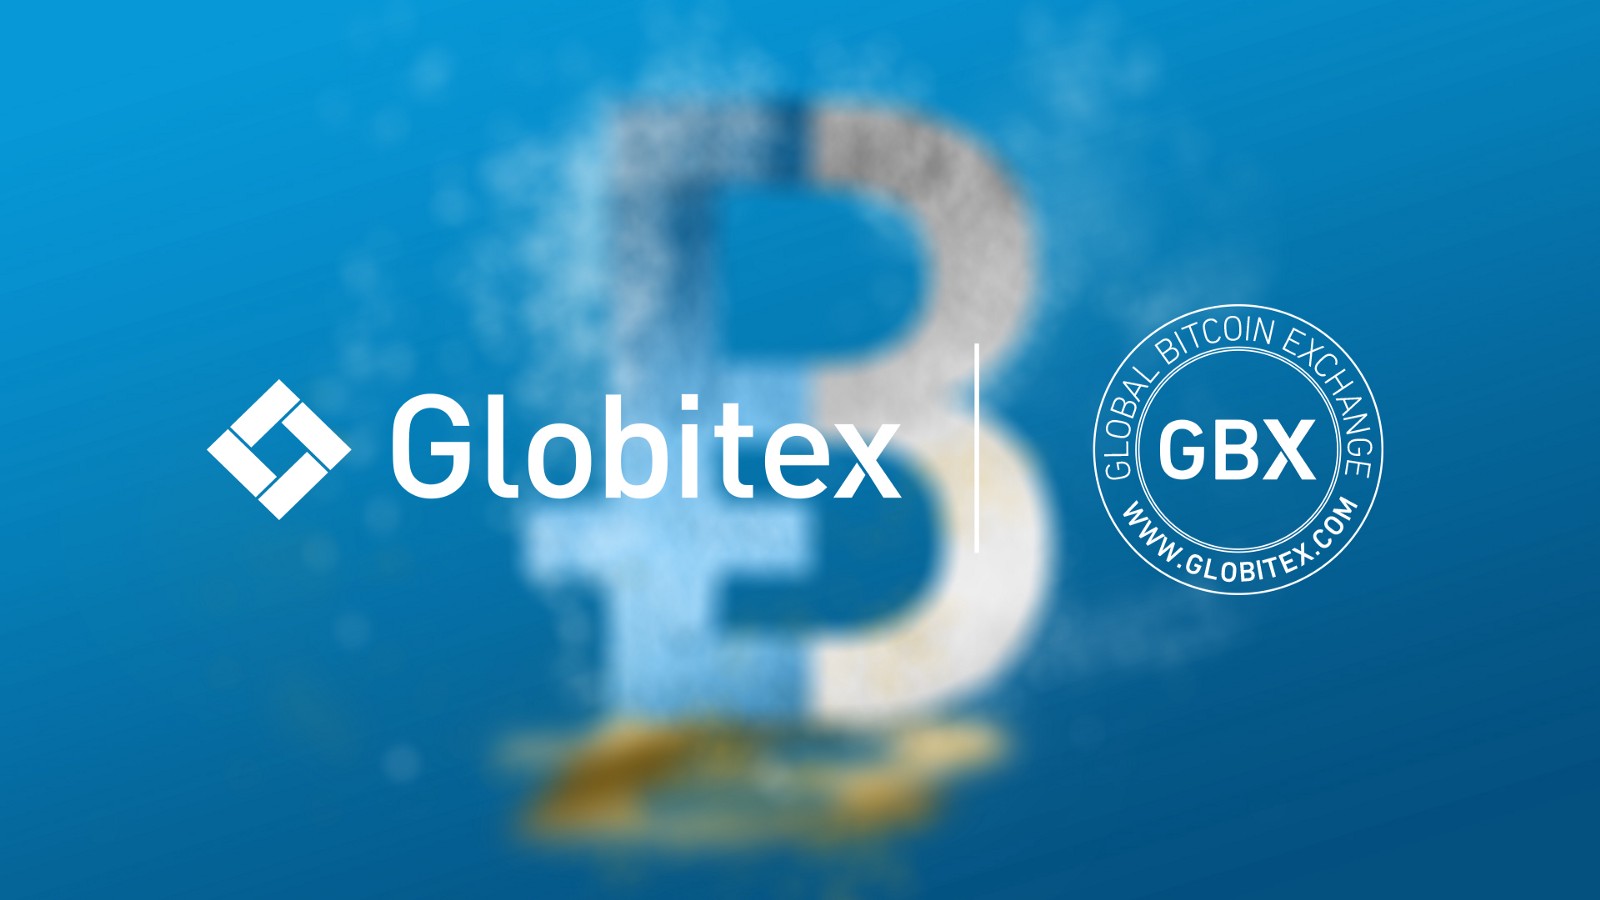 Globitex Introduces A Banking Solution With Instant Cash